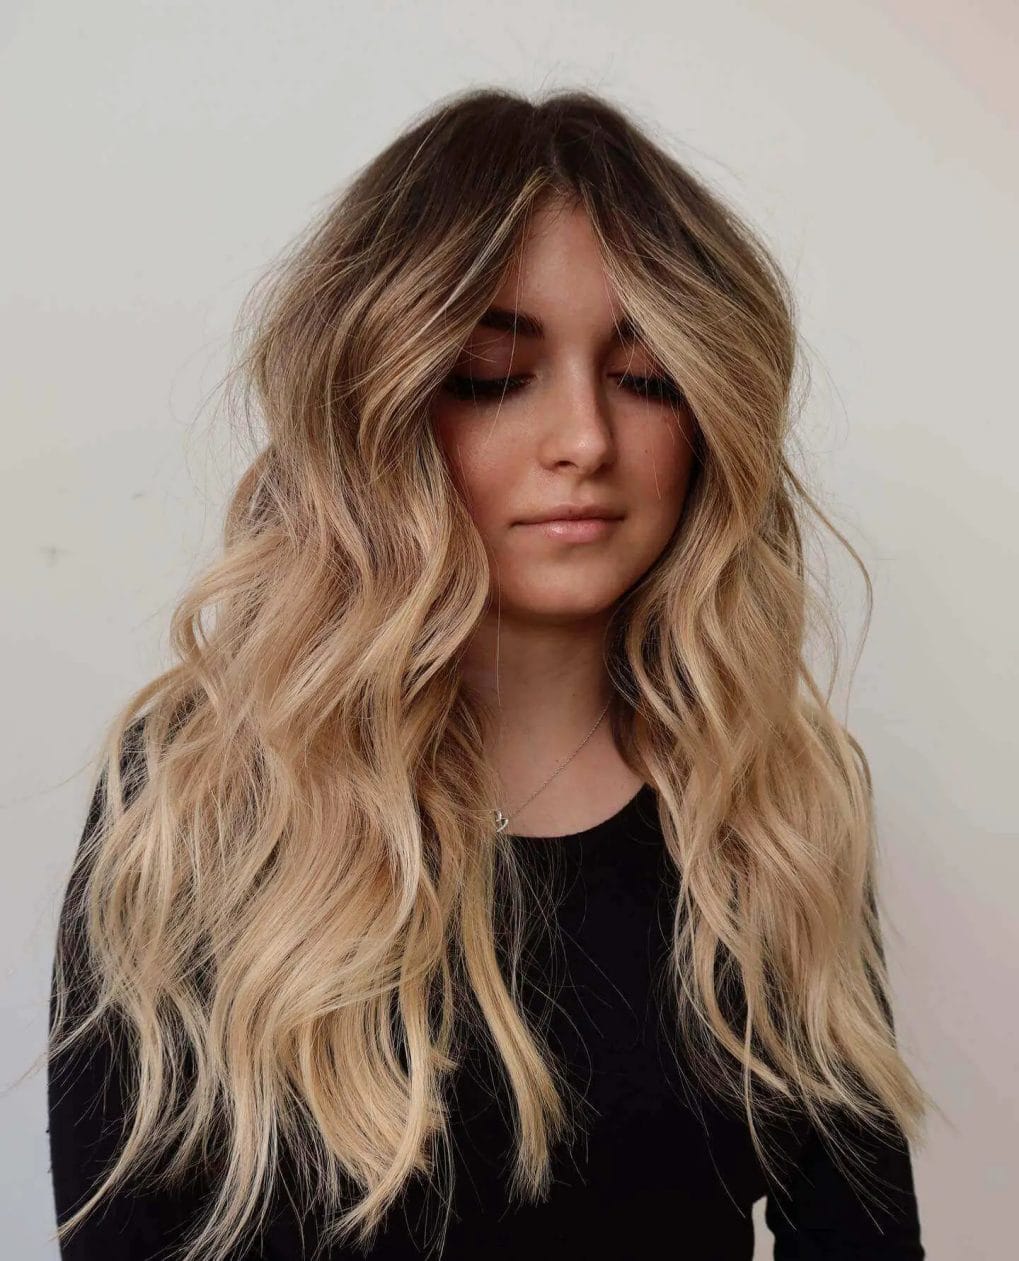 Long balayage waves from dark to beach blonde with airy bangs